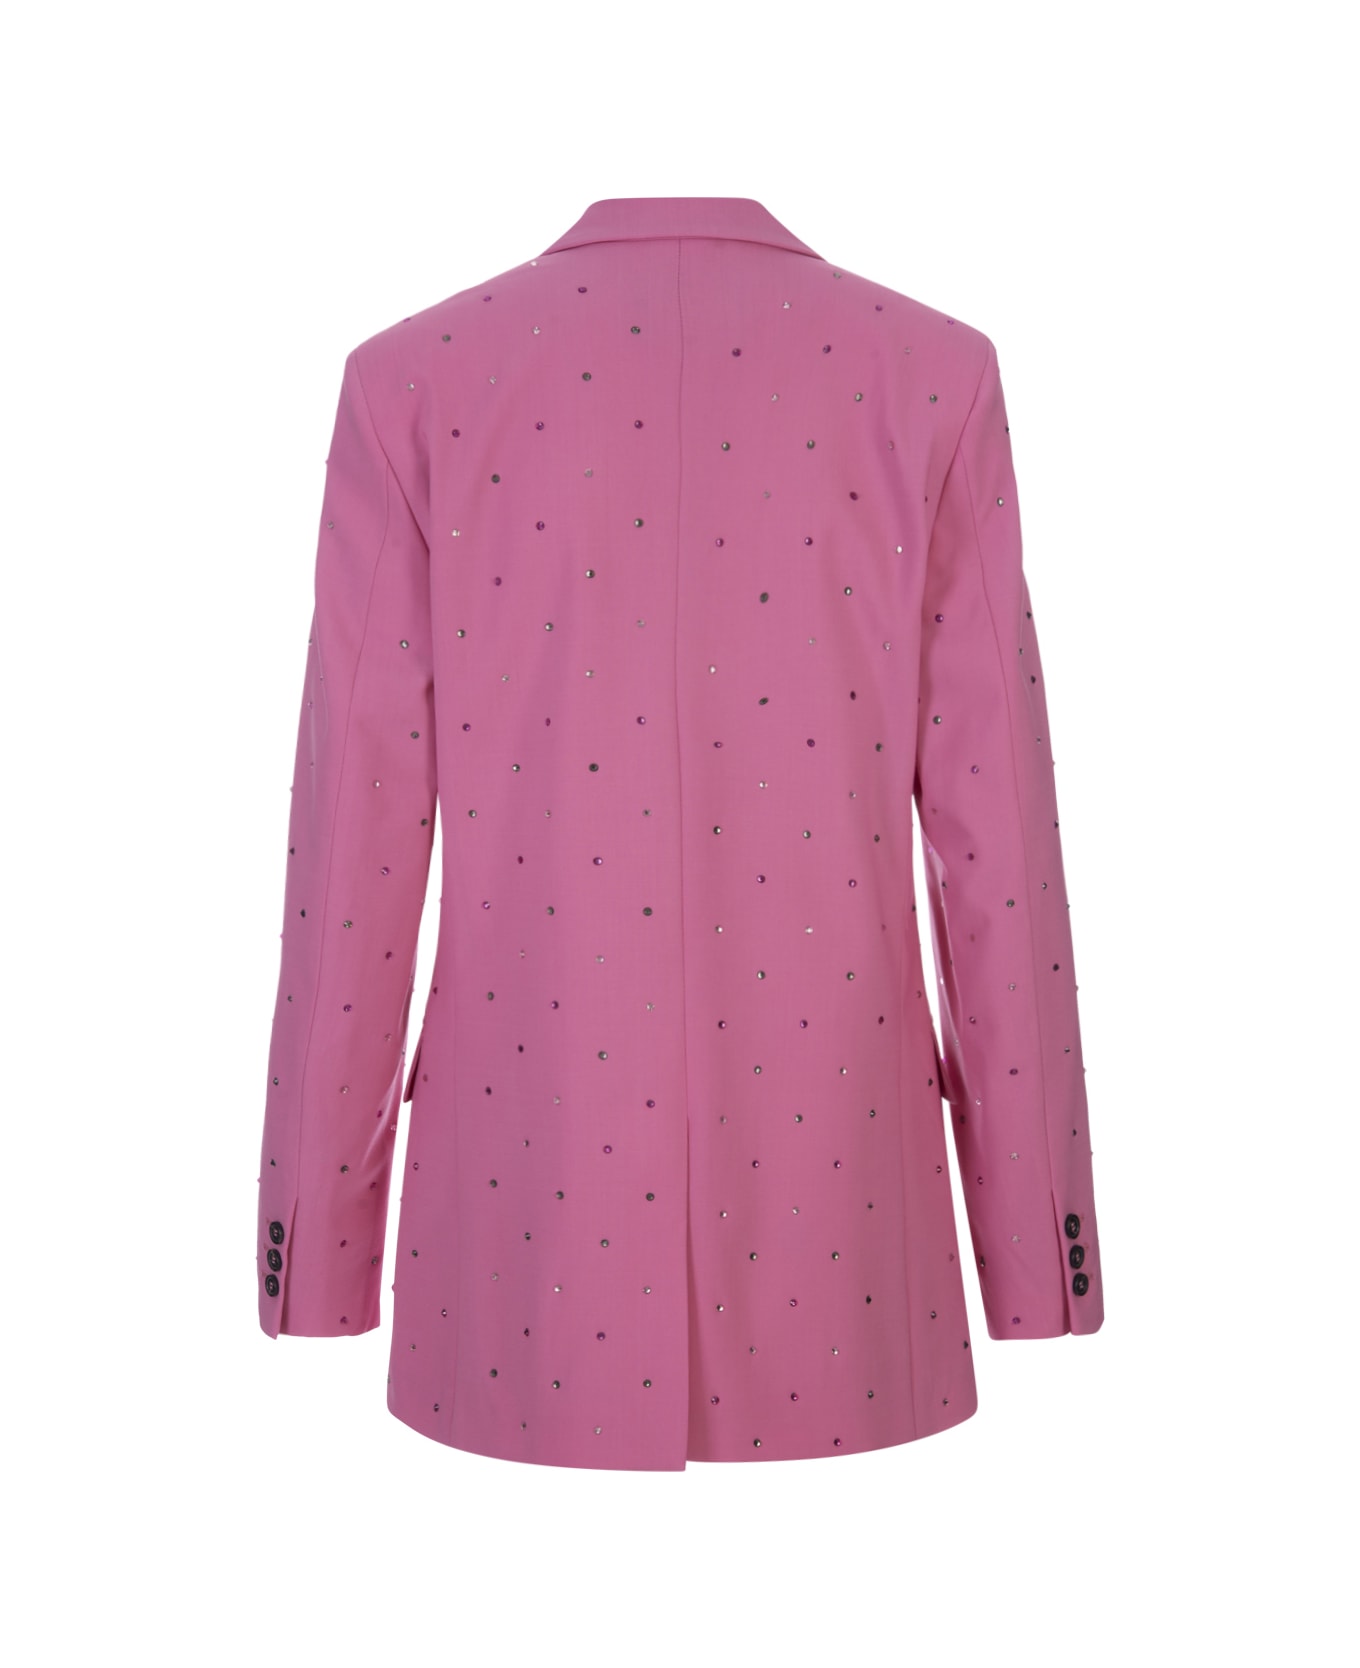 MSGM 'wool Suiting' Jacket In Pink Virgin Wool With Jewelled Applications - Pink